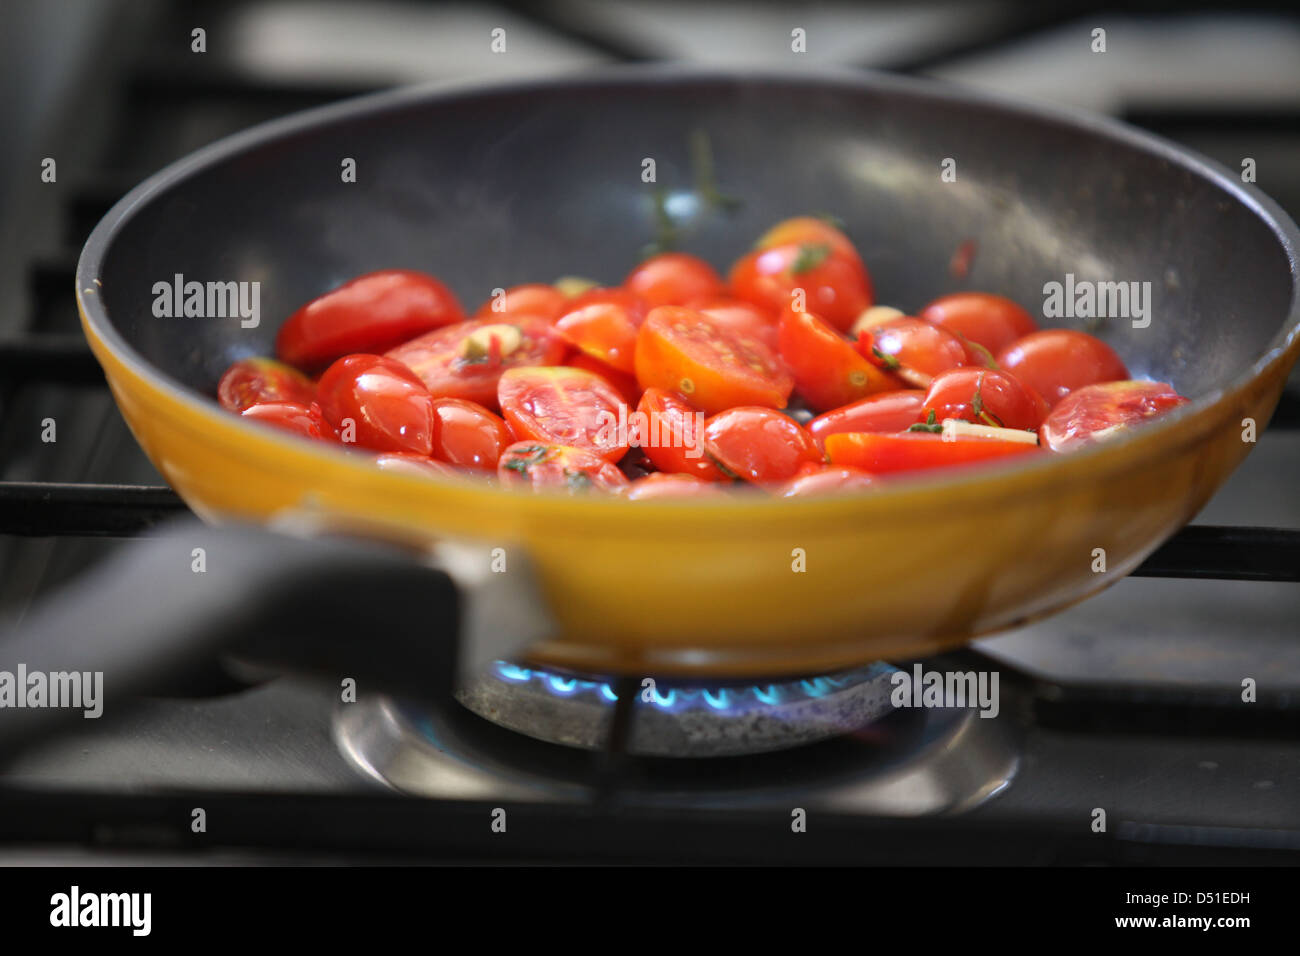 Cooking tomatoes in a frying pan Stock Photo